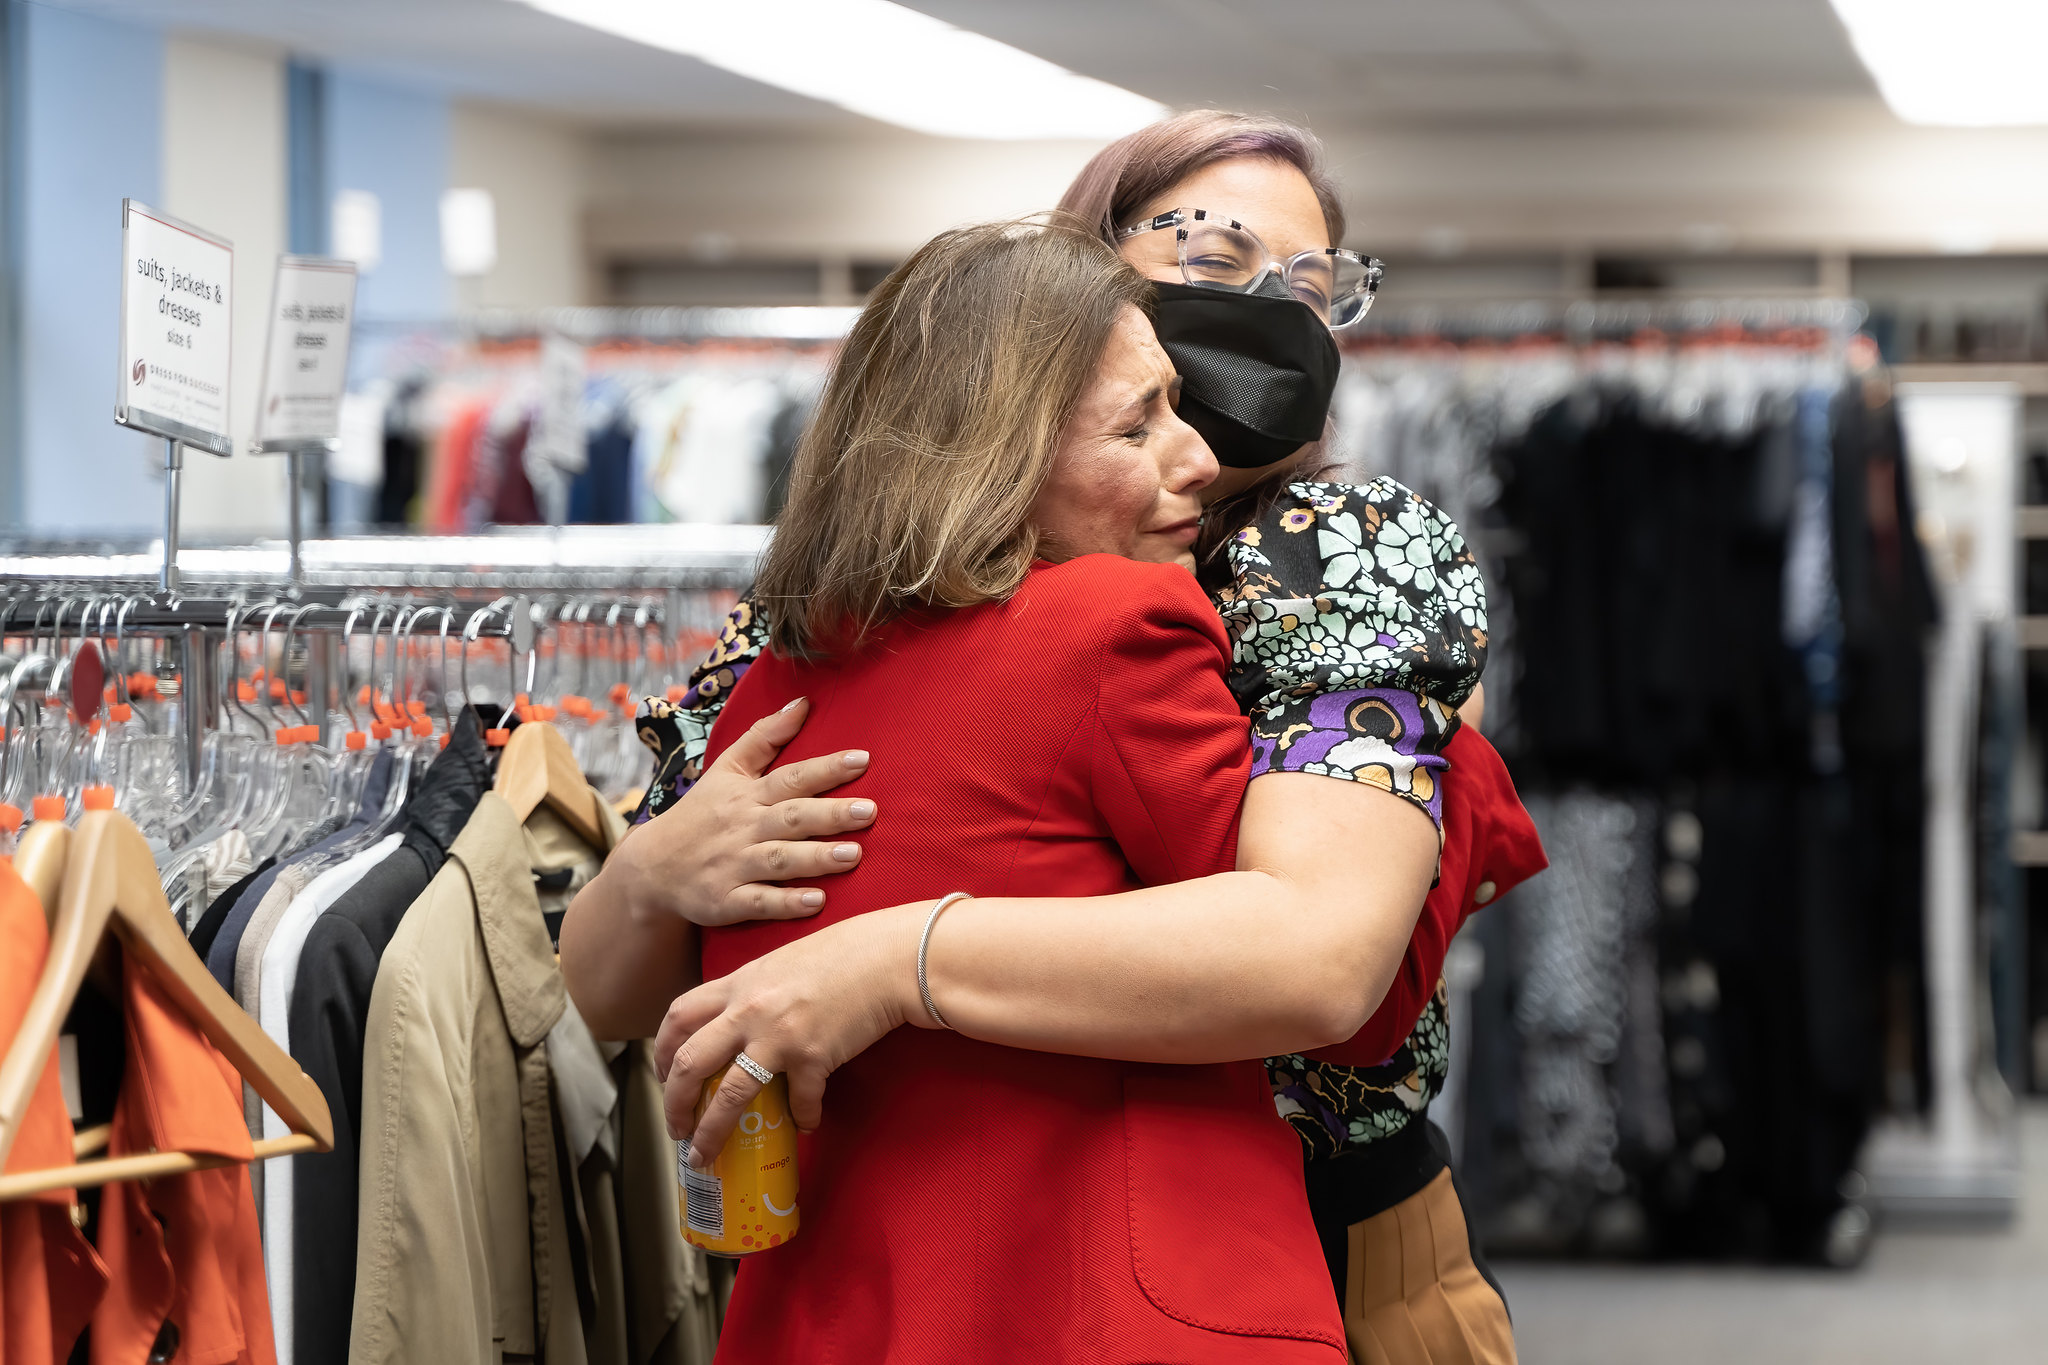 A Dress for Success Vancouver volunteer hugs a client who is being dressed for a job interview